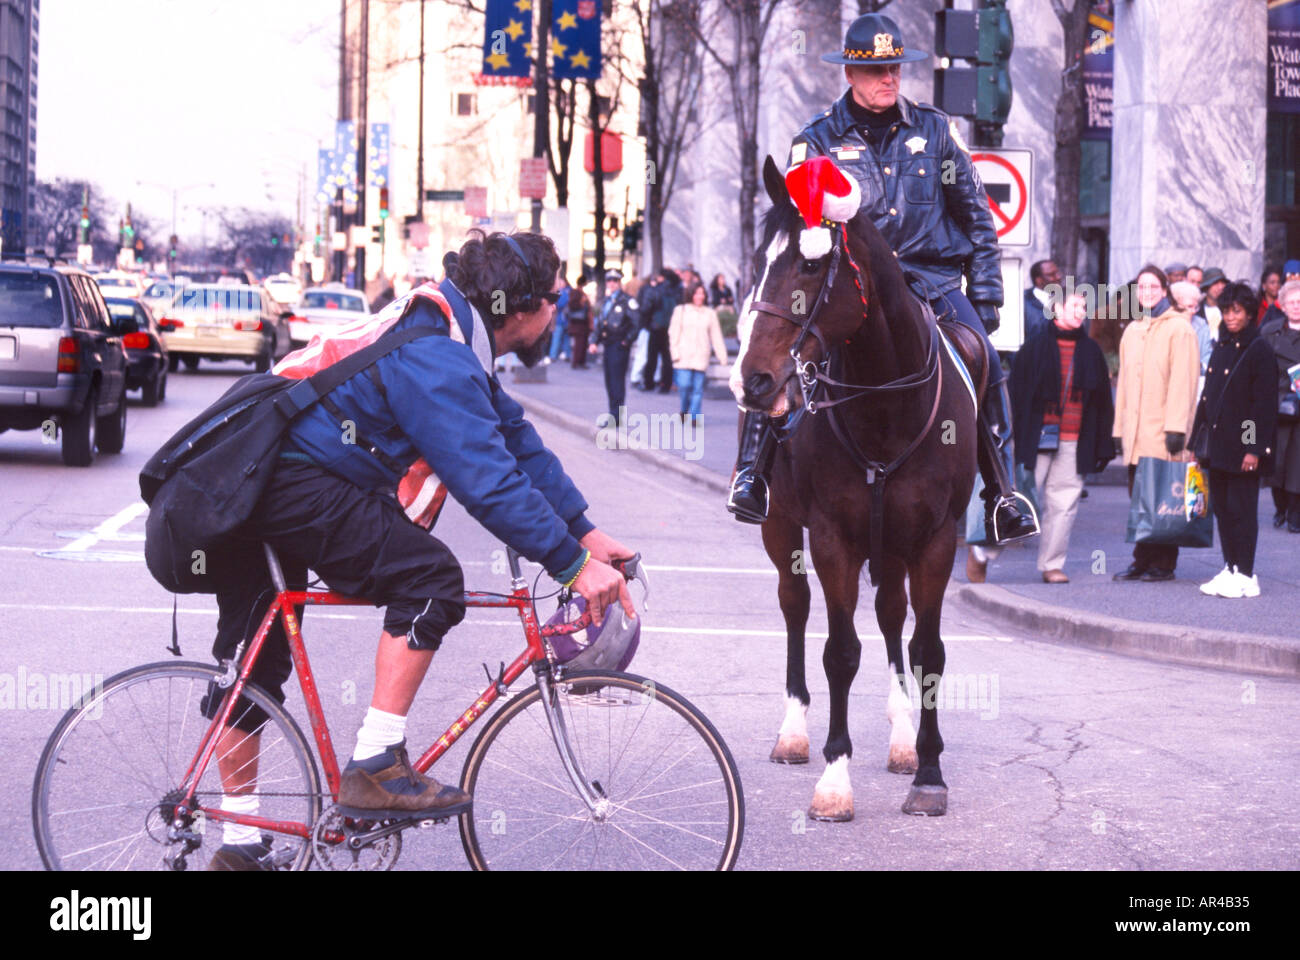 Mounted police officer and bicycle messenger Horse appears to be talking to bike messenger Michigan Avenue Chicago Illinois USA Stock Photo